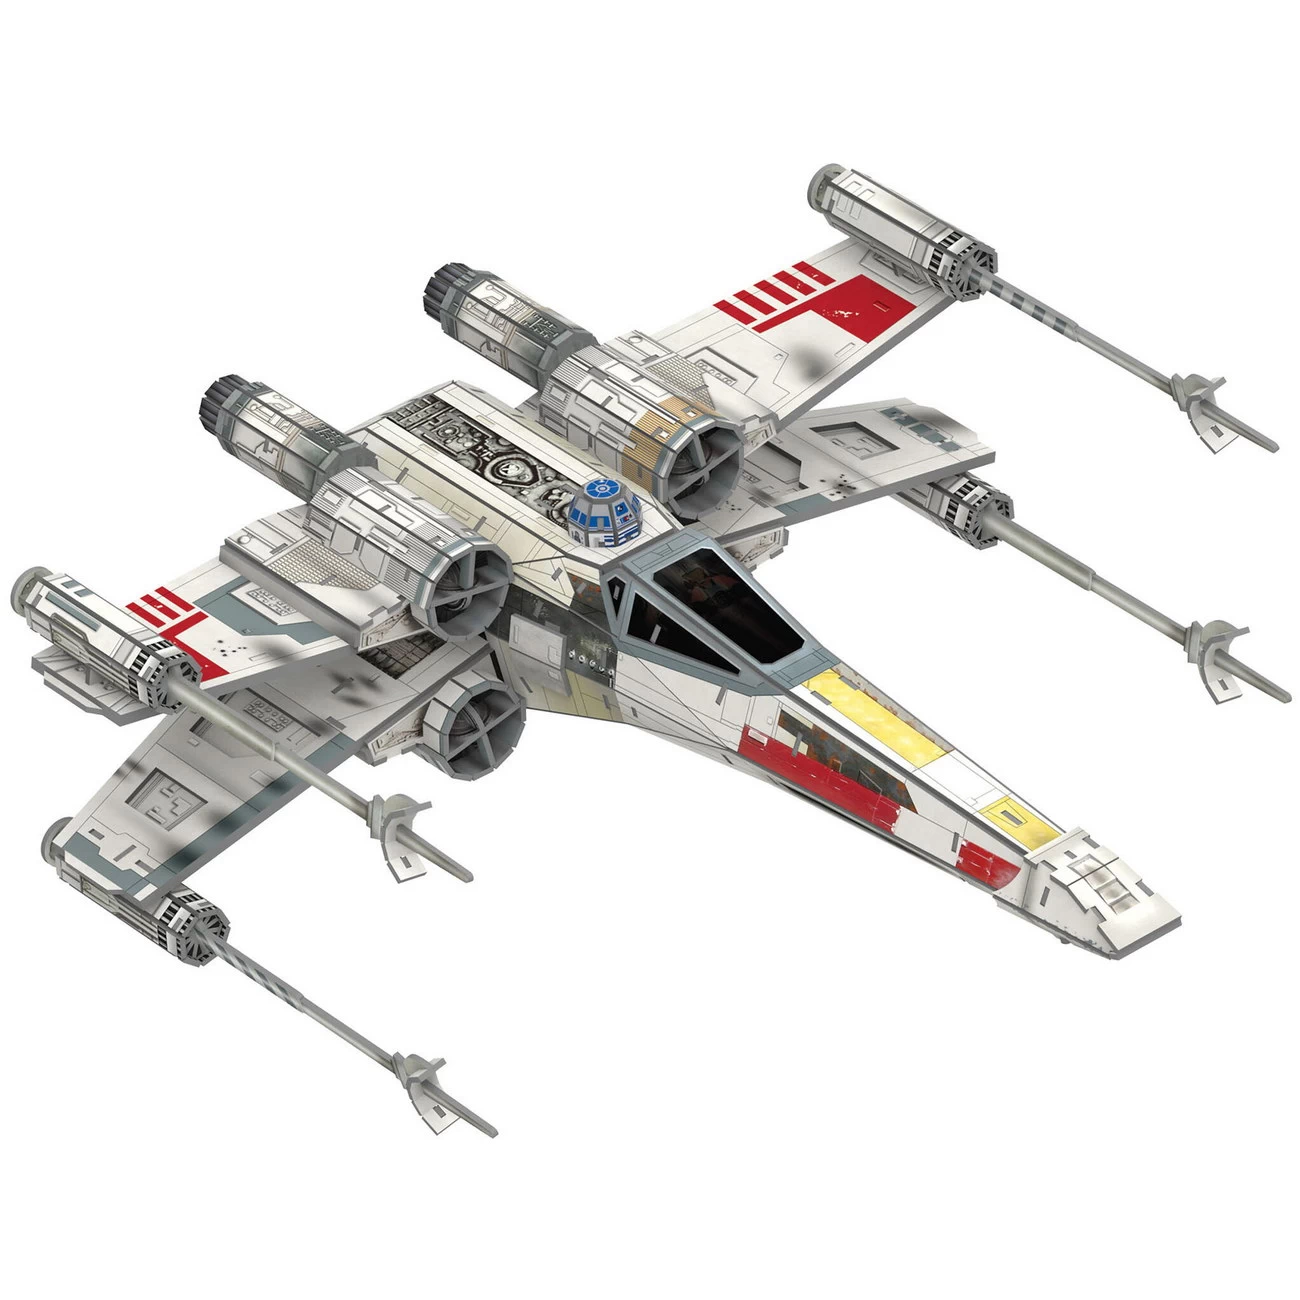 Revell 00316 - Star Wars T-65 X-Wing Starfighter - 3D Puzzle